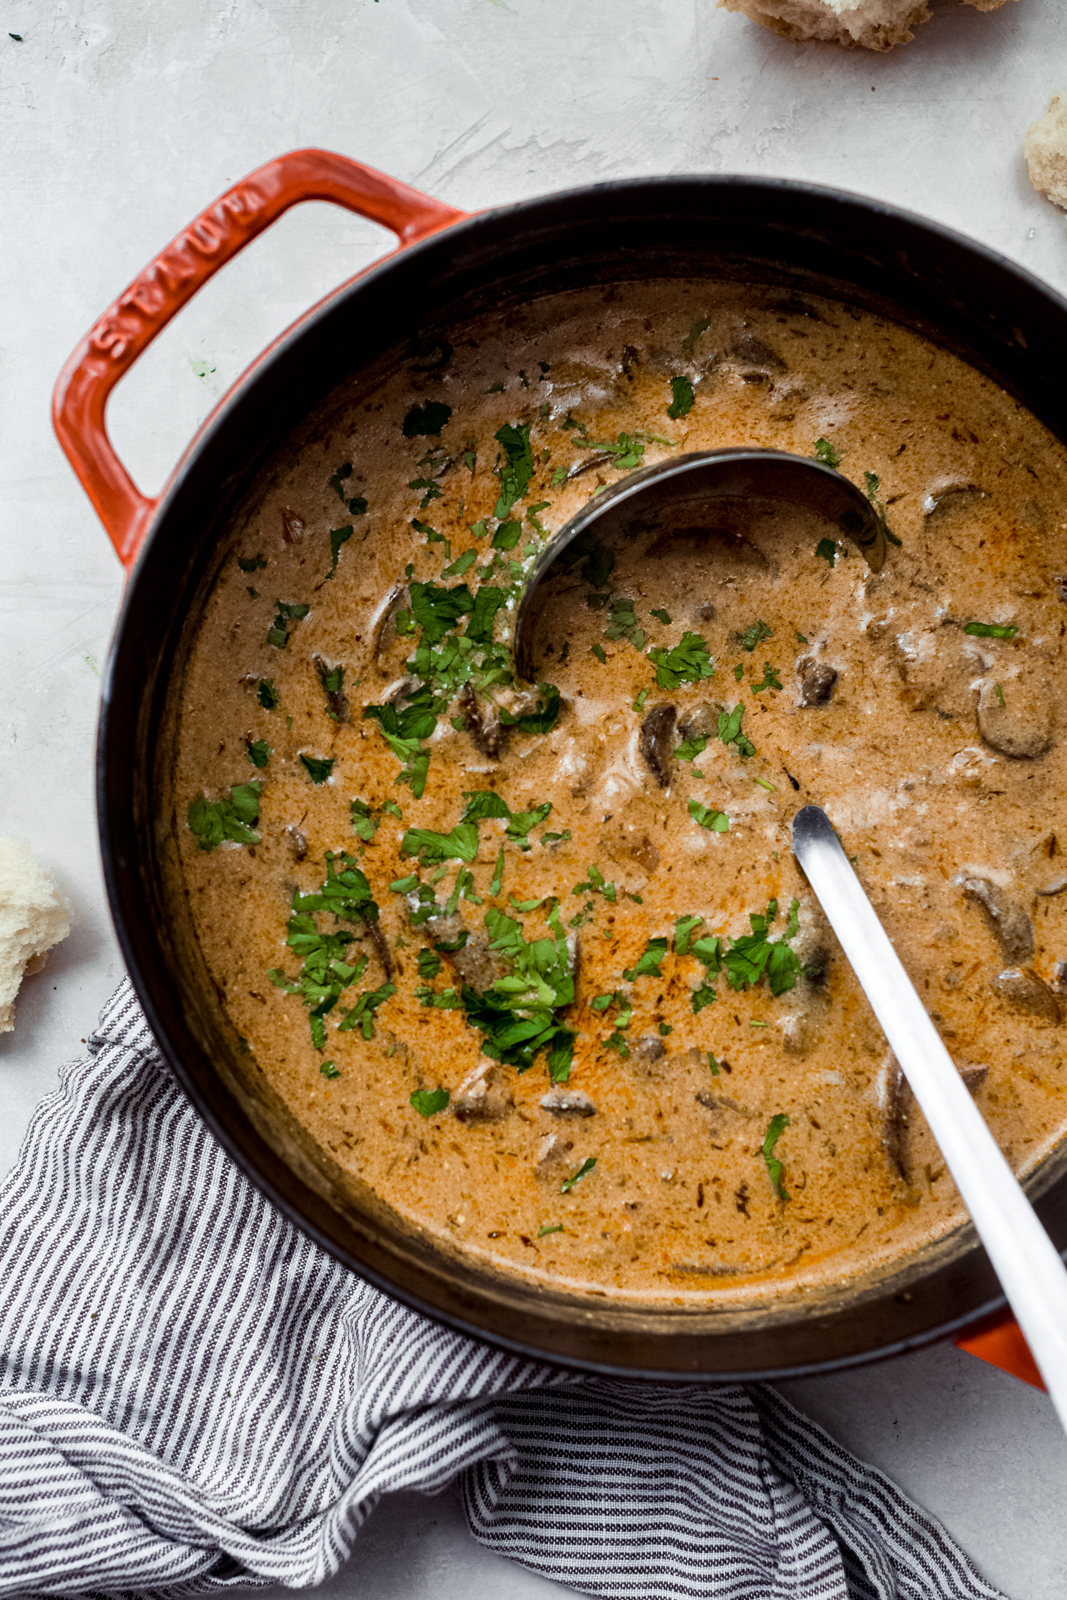 mushroom soup topped with parsley in a cast iron pot with ladle